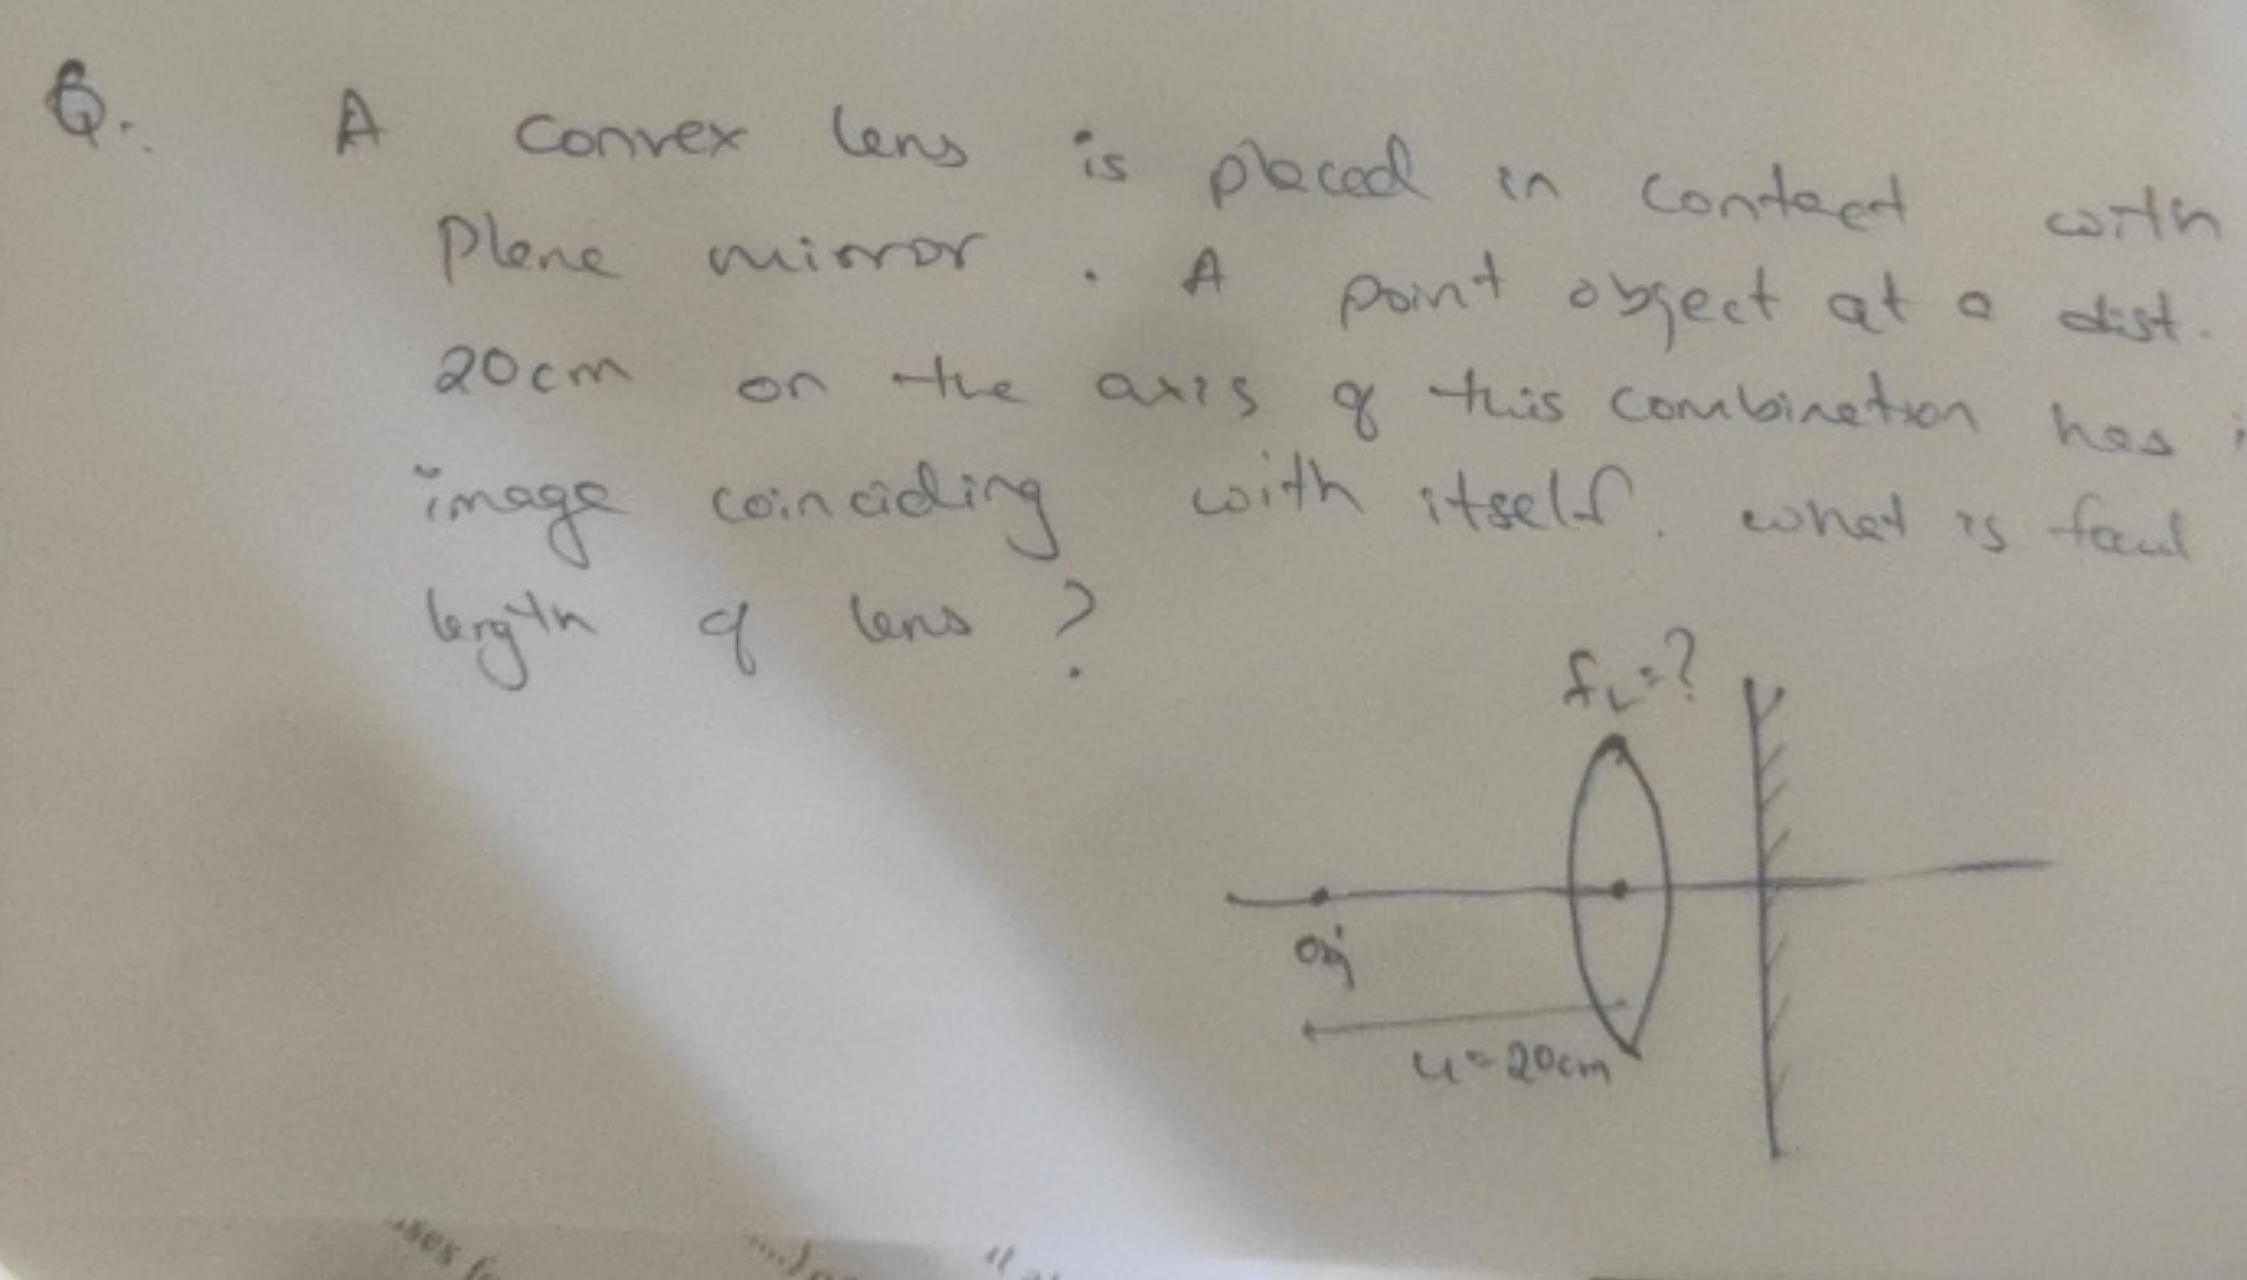 Q. A convex lens is placed in contact with Plane mirror. A point objec